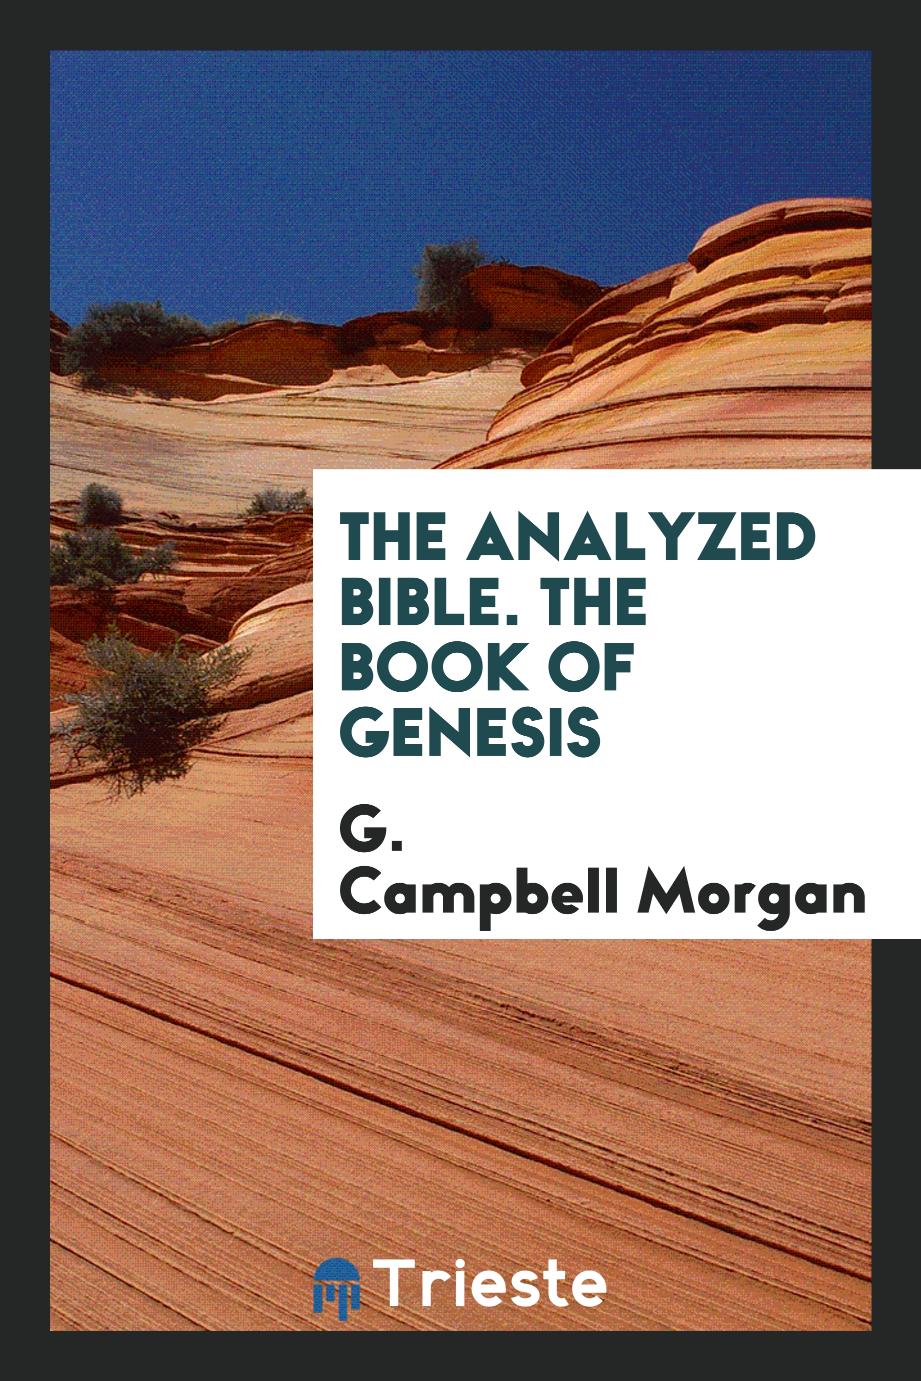 The analyzed Bible. The book of genesis